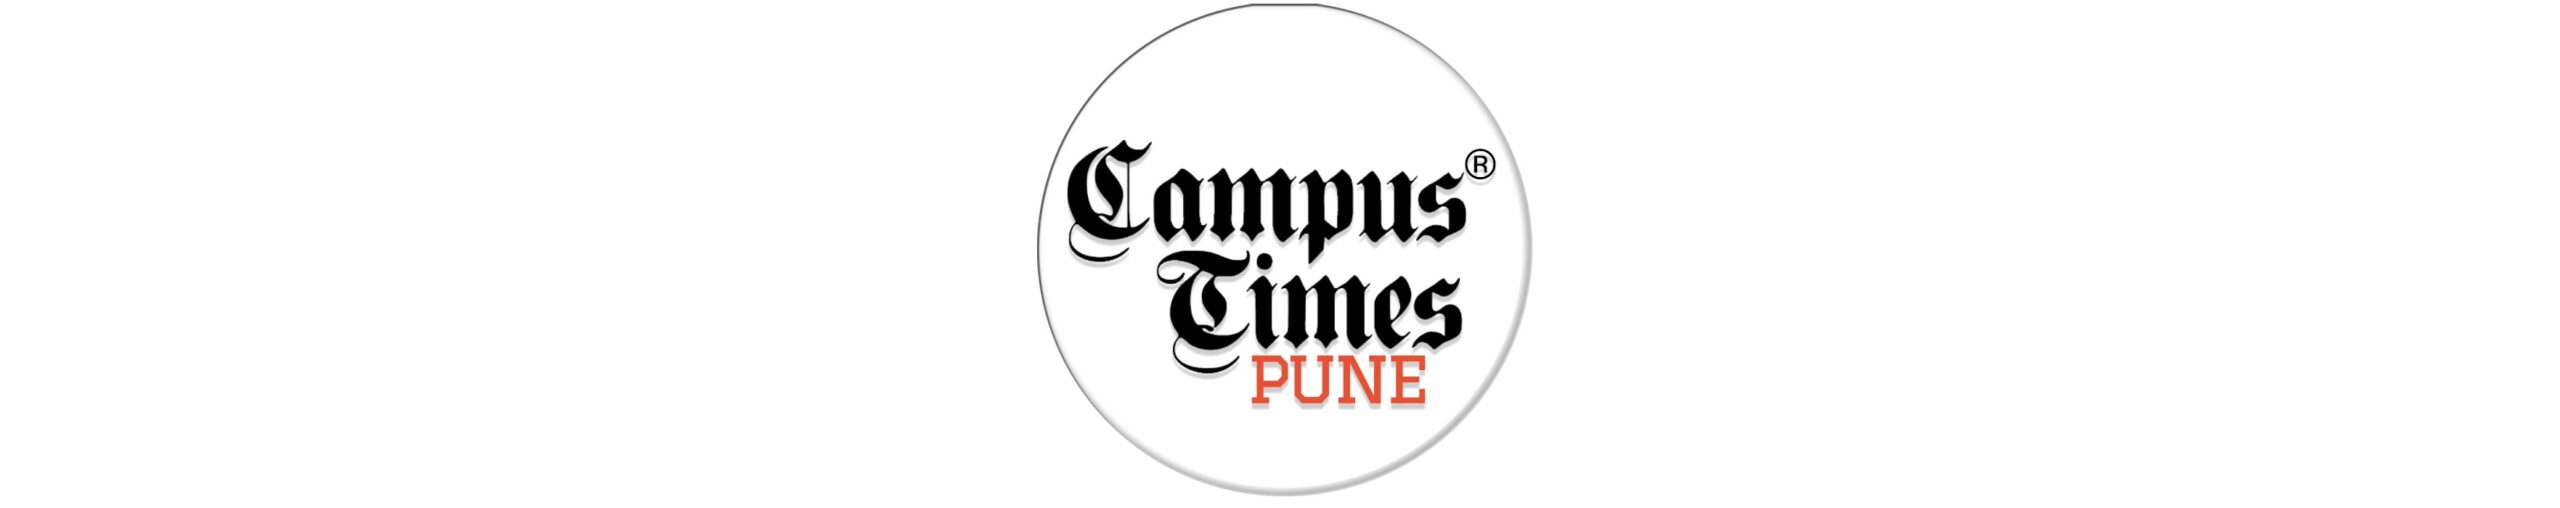 Campus Times